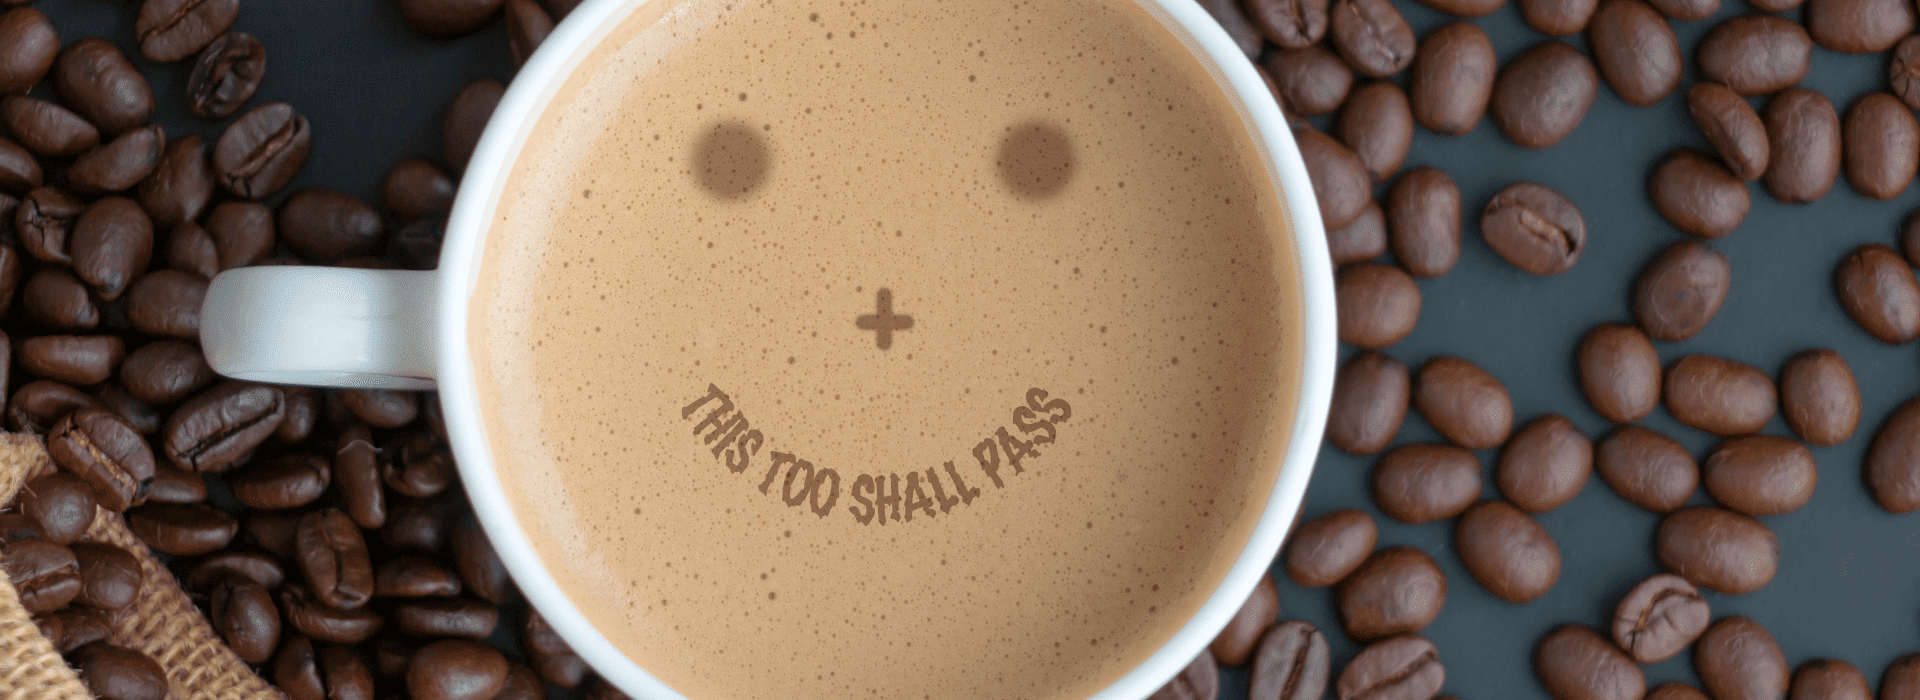 Chakra Balancing and Perimenopause | 'This too shall pass' written in the foam of a cappuccino | Shine Body & Bath Chakra Soap | Blog